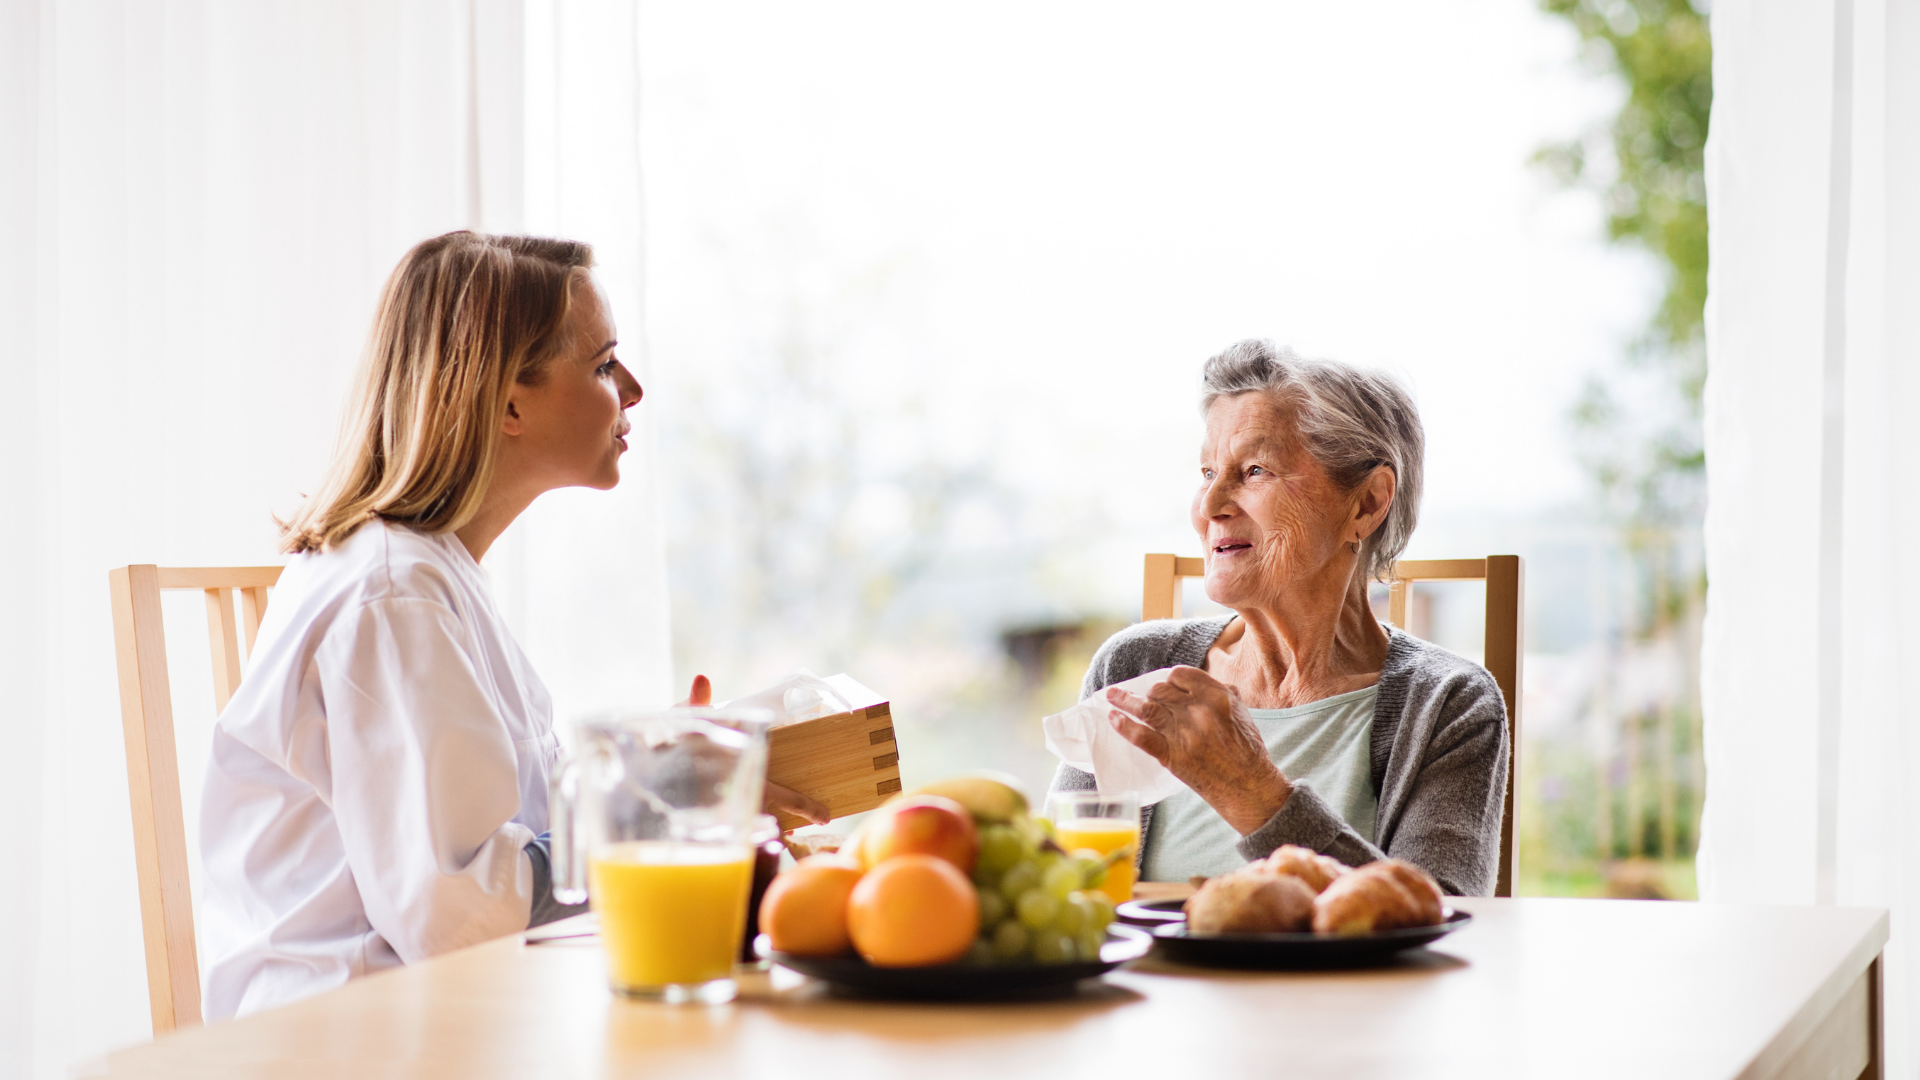 photo of an older woman sitting at table with a younger woman in a white lab coat